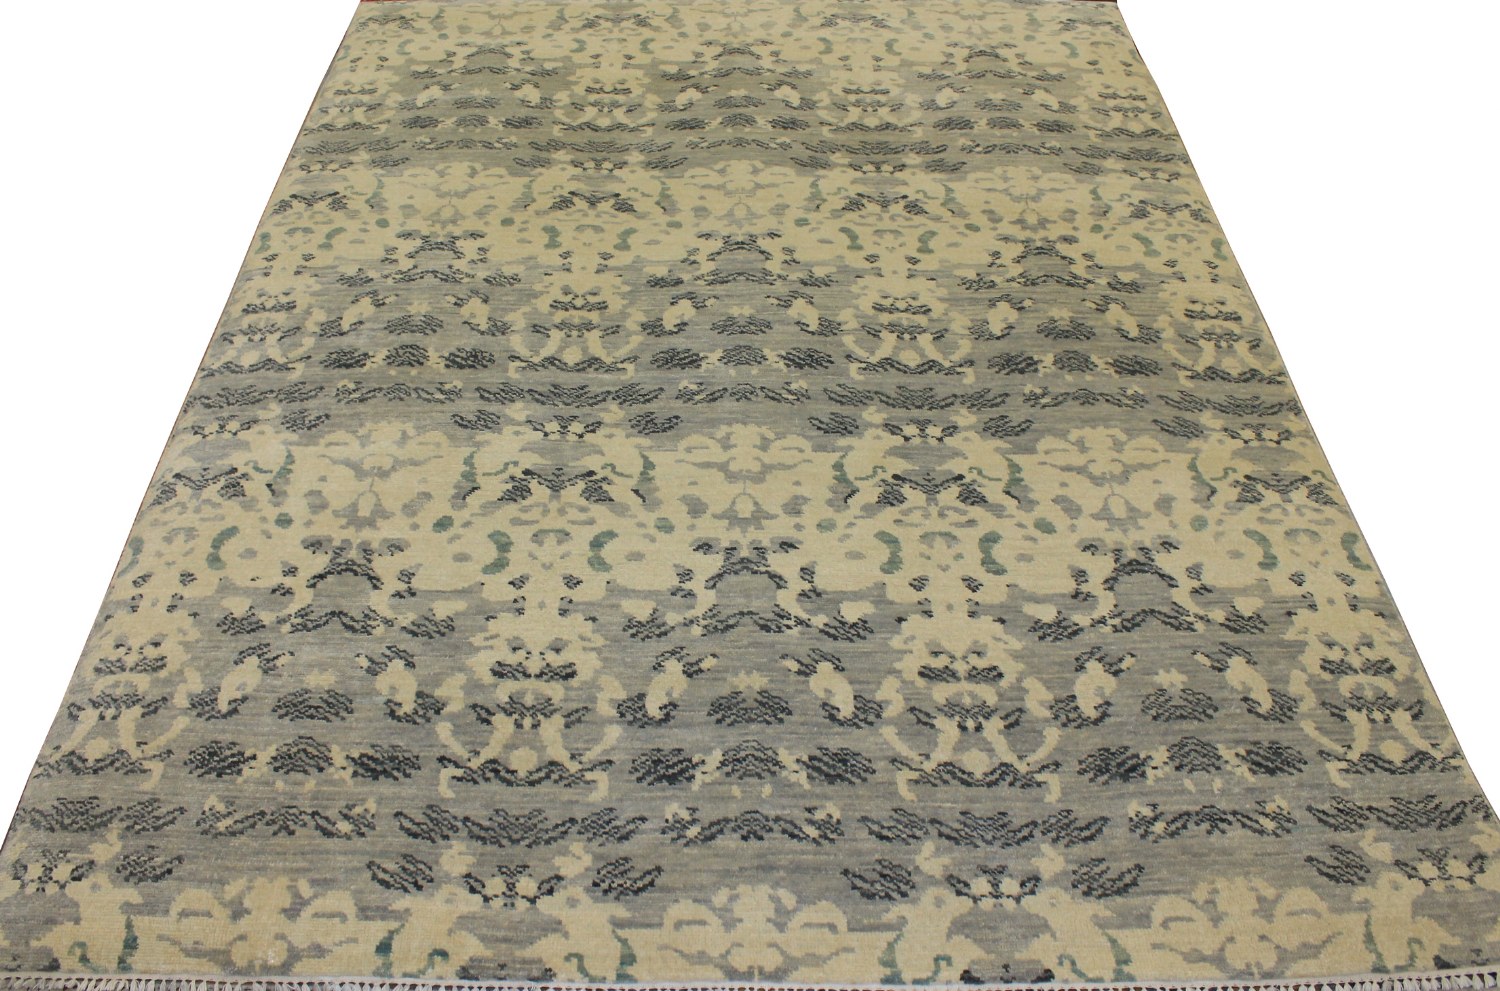 9x12 Contemporary Hand Knotted Wool Area Rug - MR18515